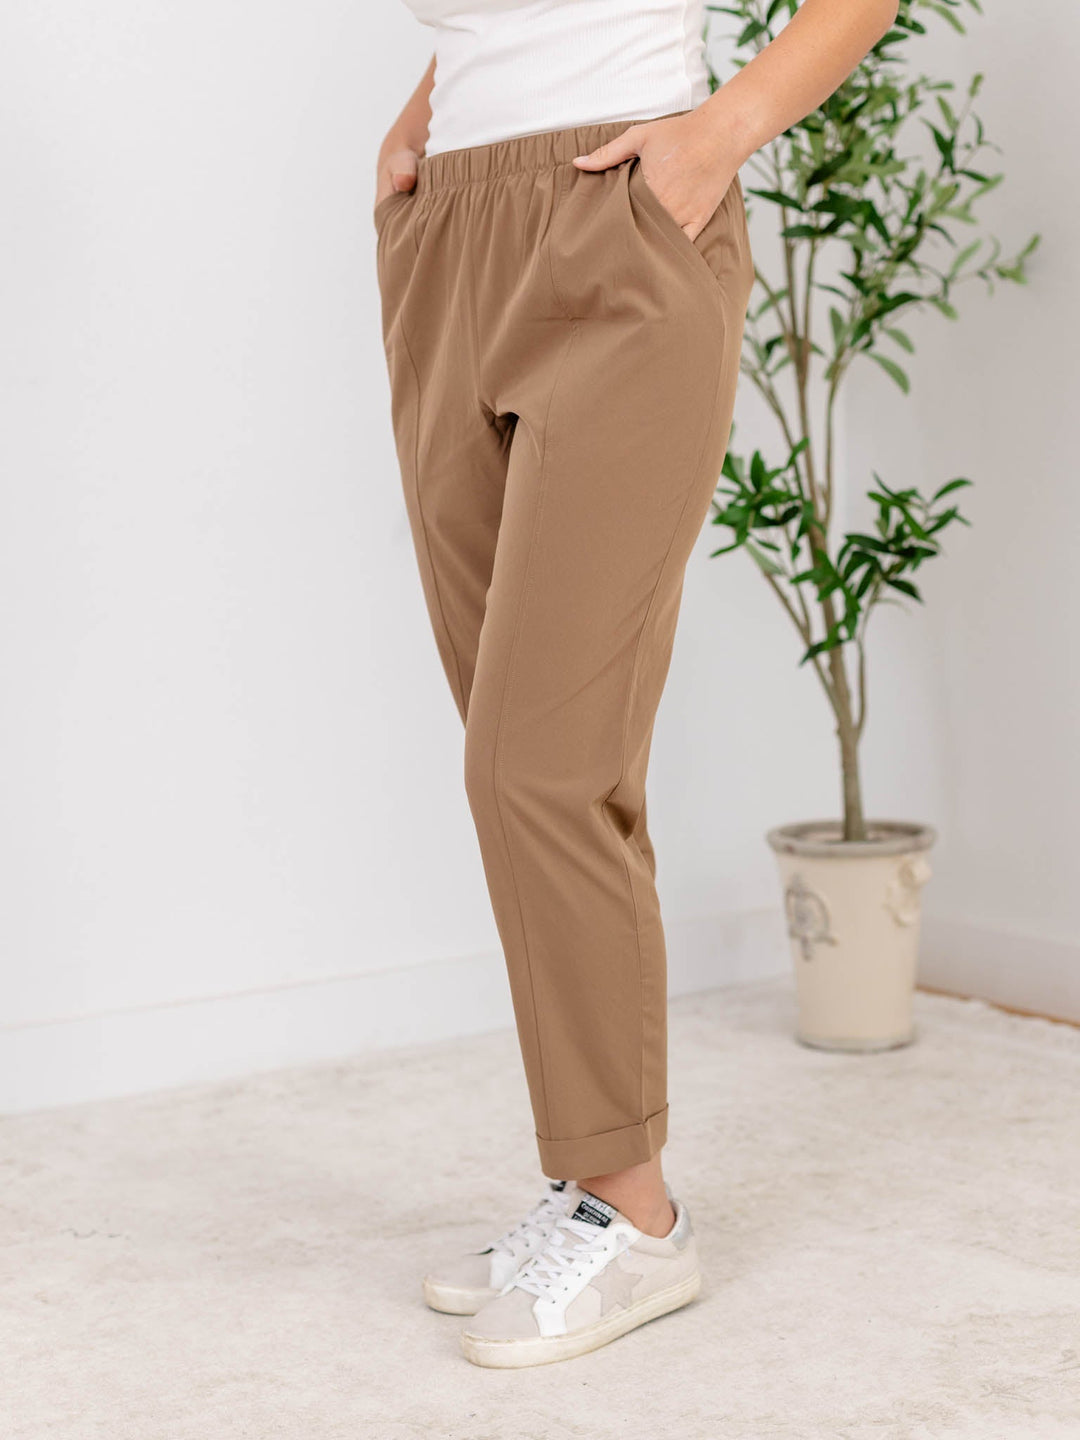 Varley Everly Turnup Taper Pant 27.5Athleisure